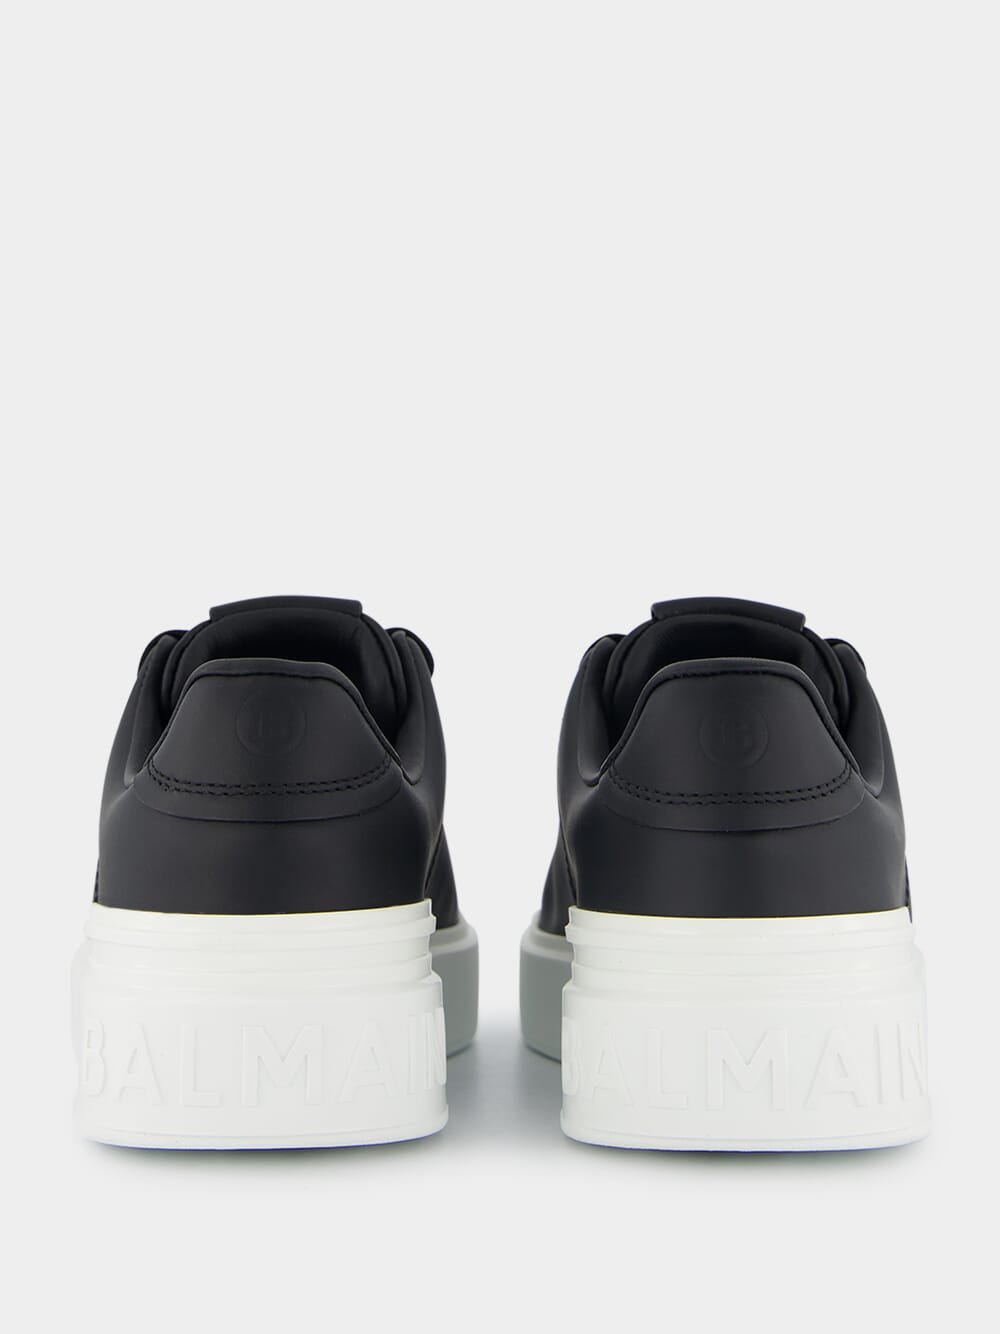 BalmainB-Court Low-Top Sneakers at Fashion Clinic